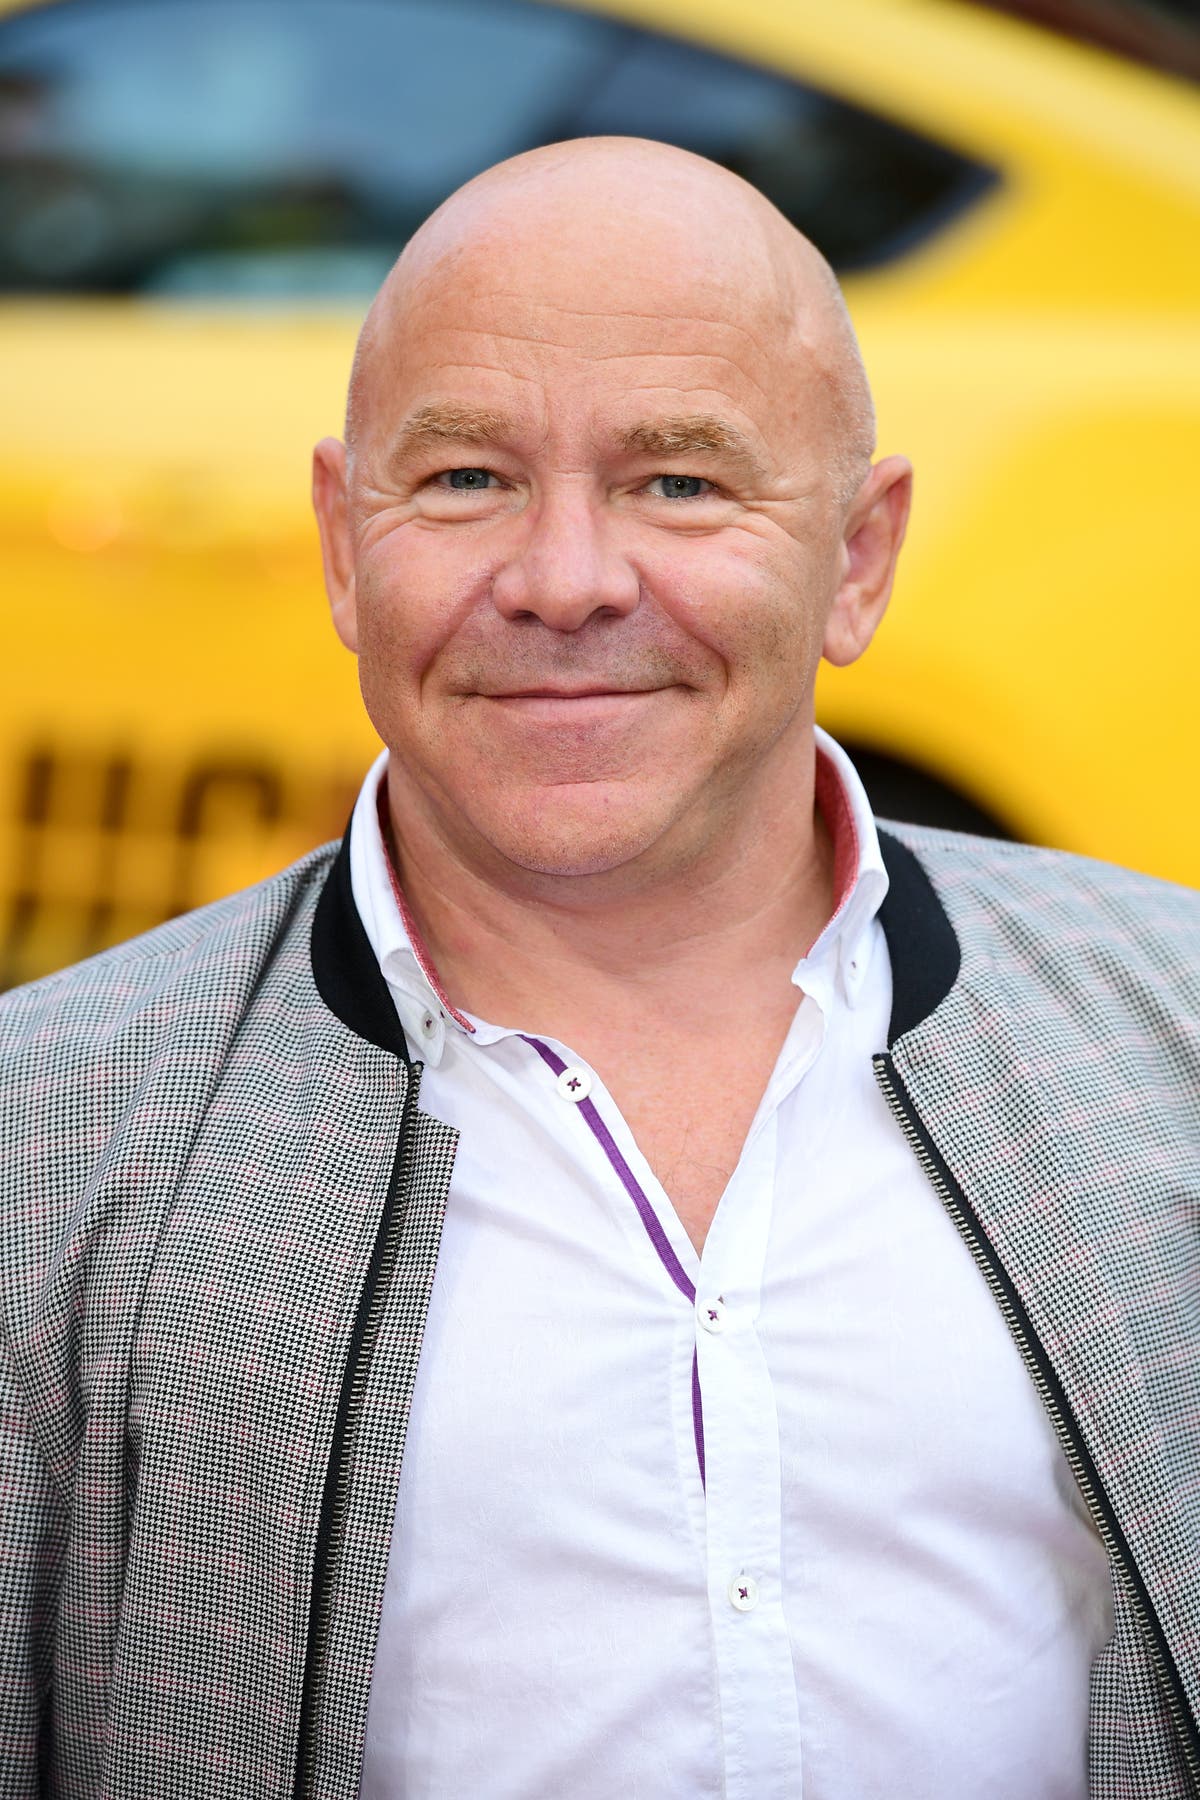 TV’s Dominic Littlewood on how to reduce your energy use right now, ahead of this winter’s bill hikes